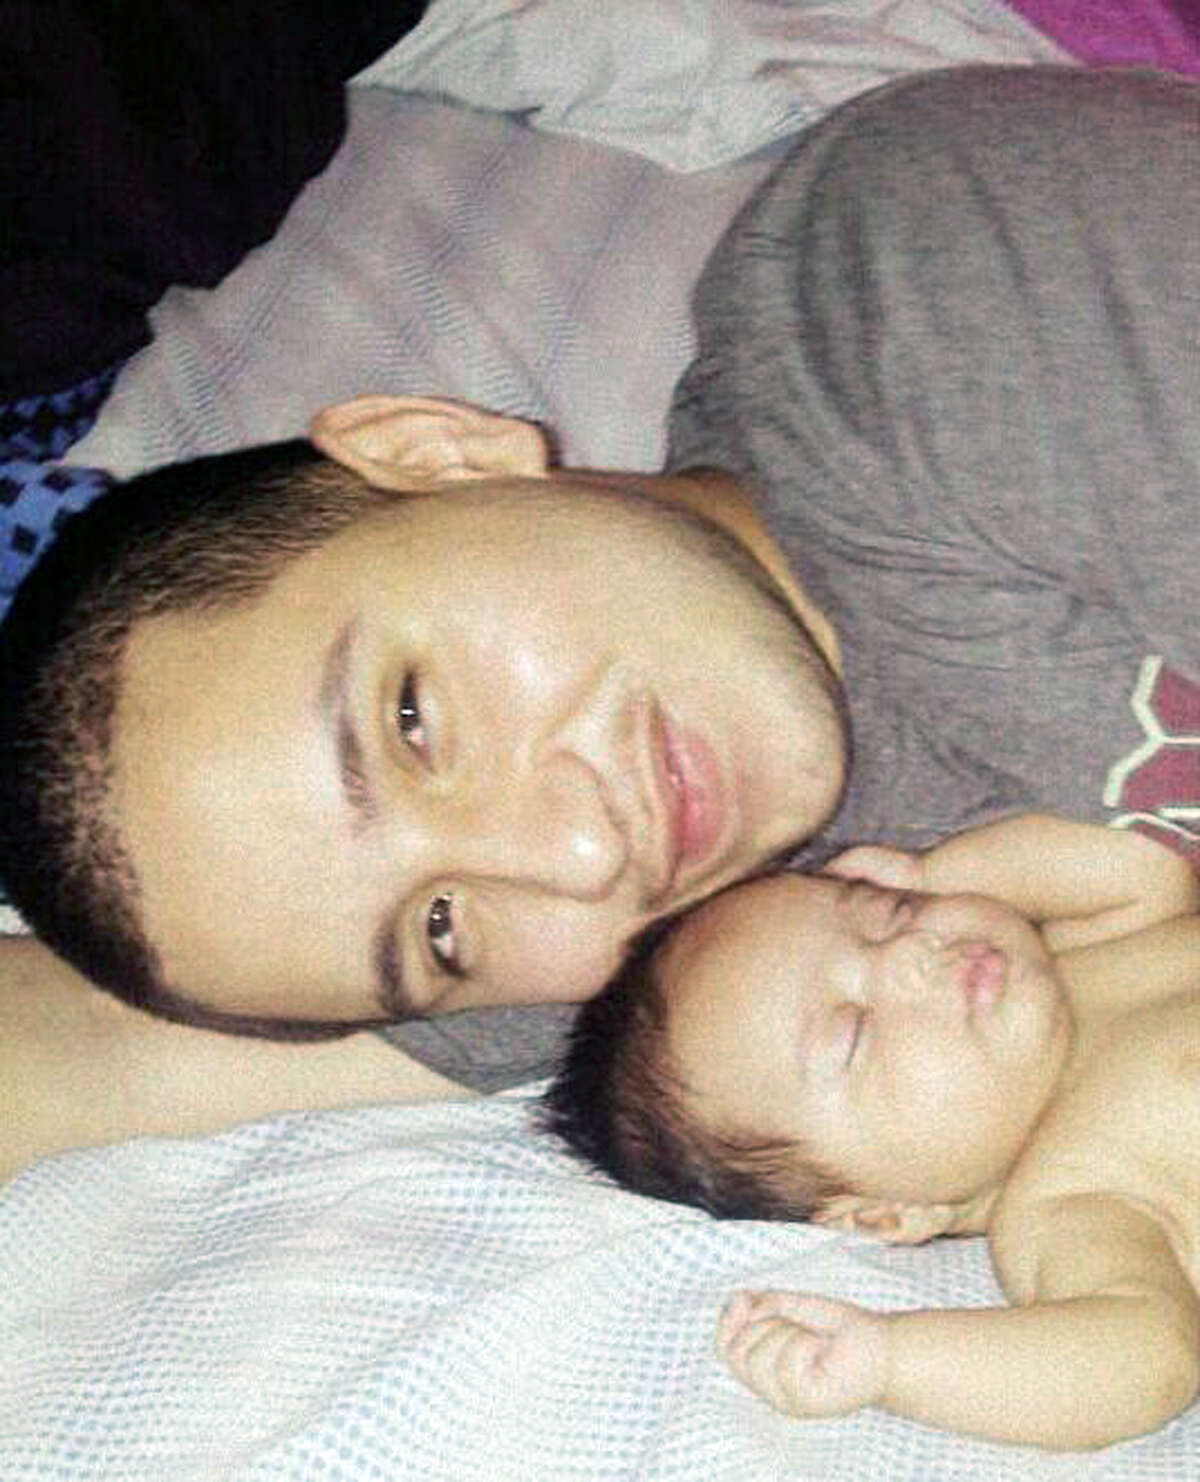 Jose Banda, 20, who was found dead in the car with gunshot wounds, is shown with his newborn daughter. ﻿